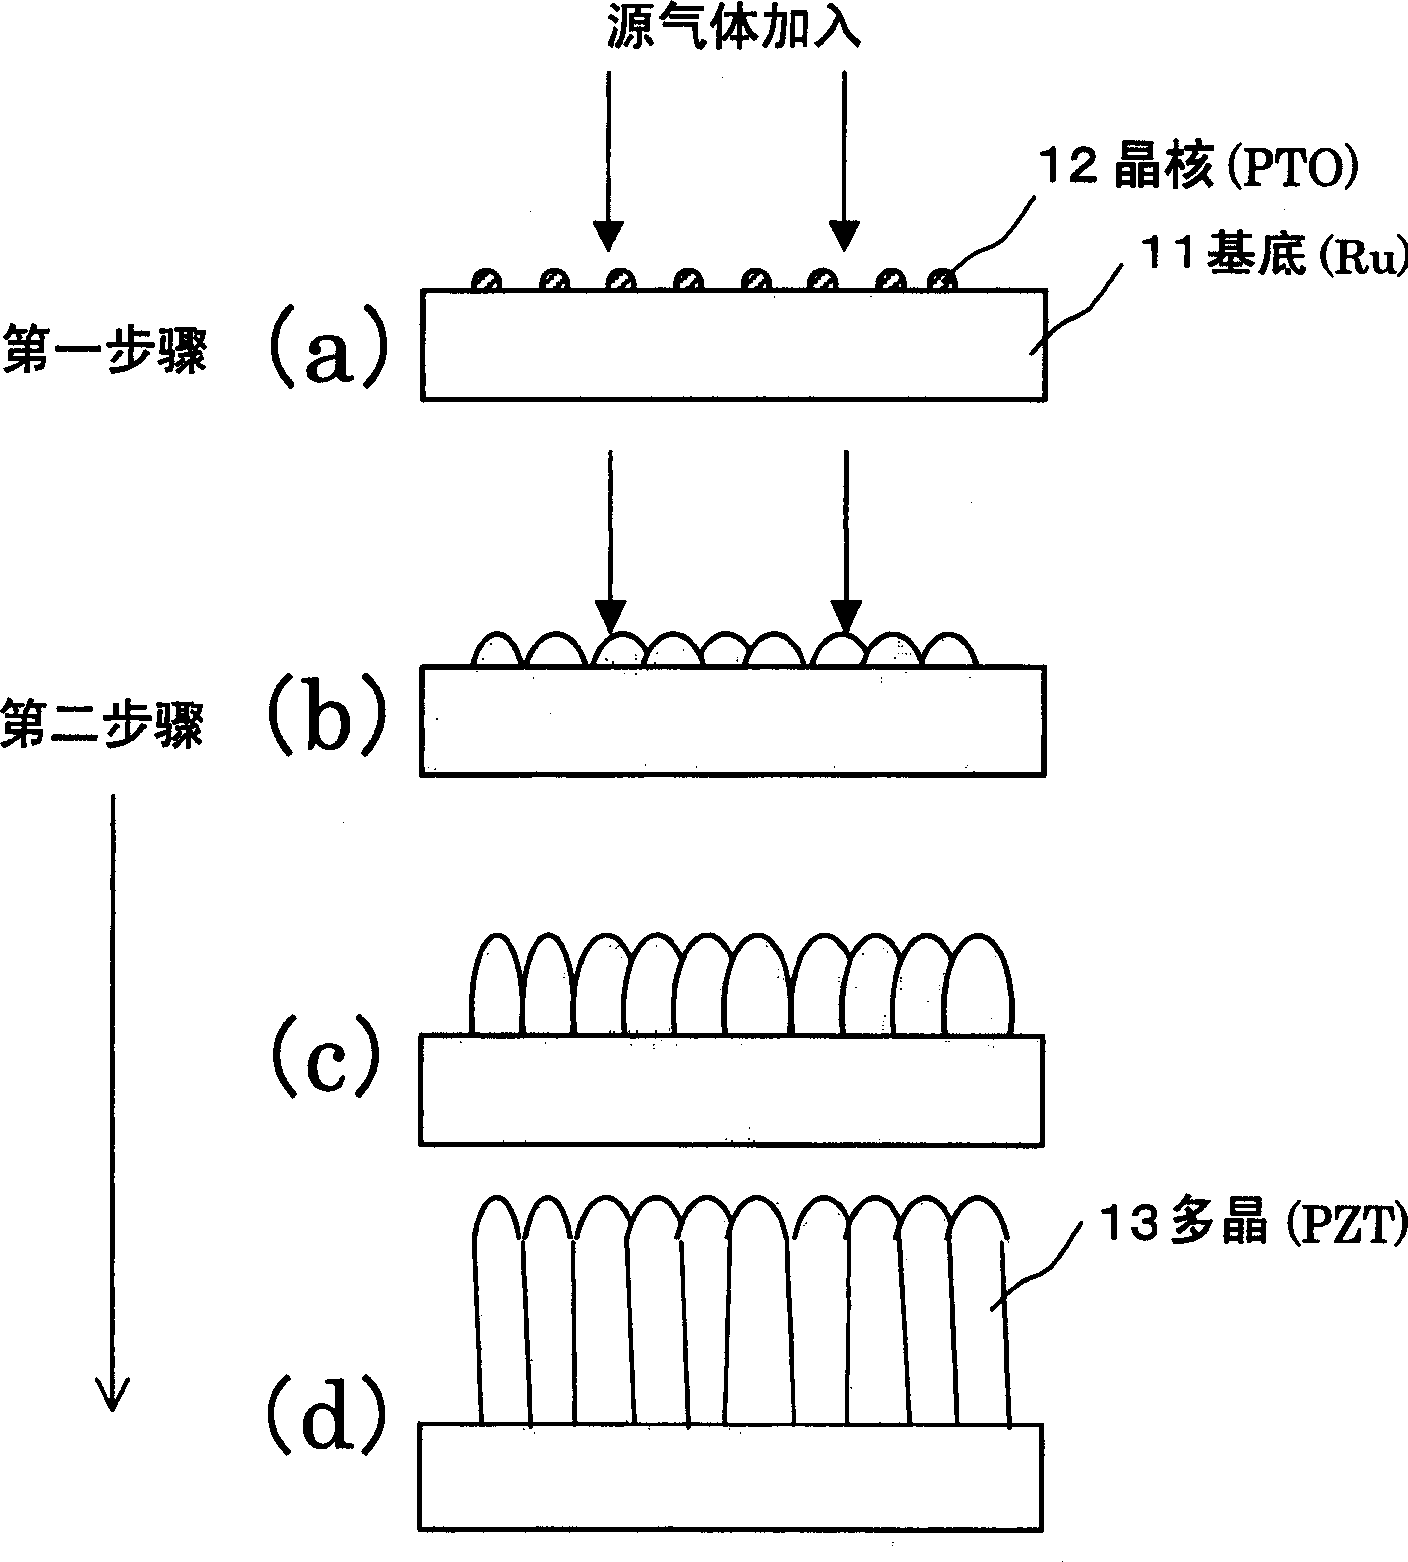 Vapor growth method for metal oxide dielectric film and PZT film